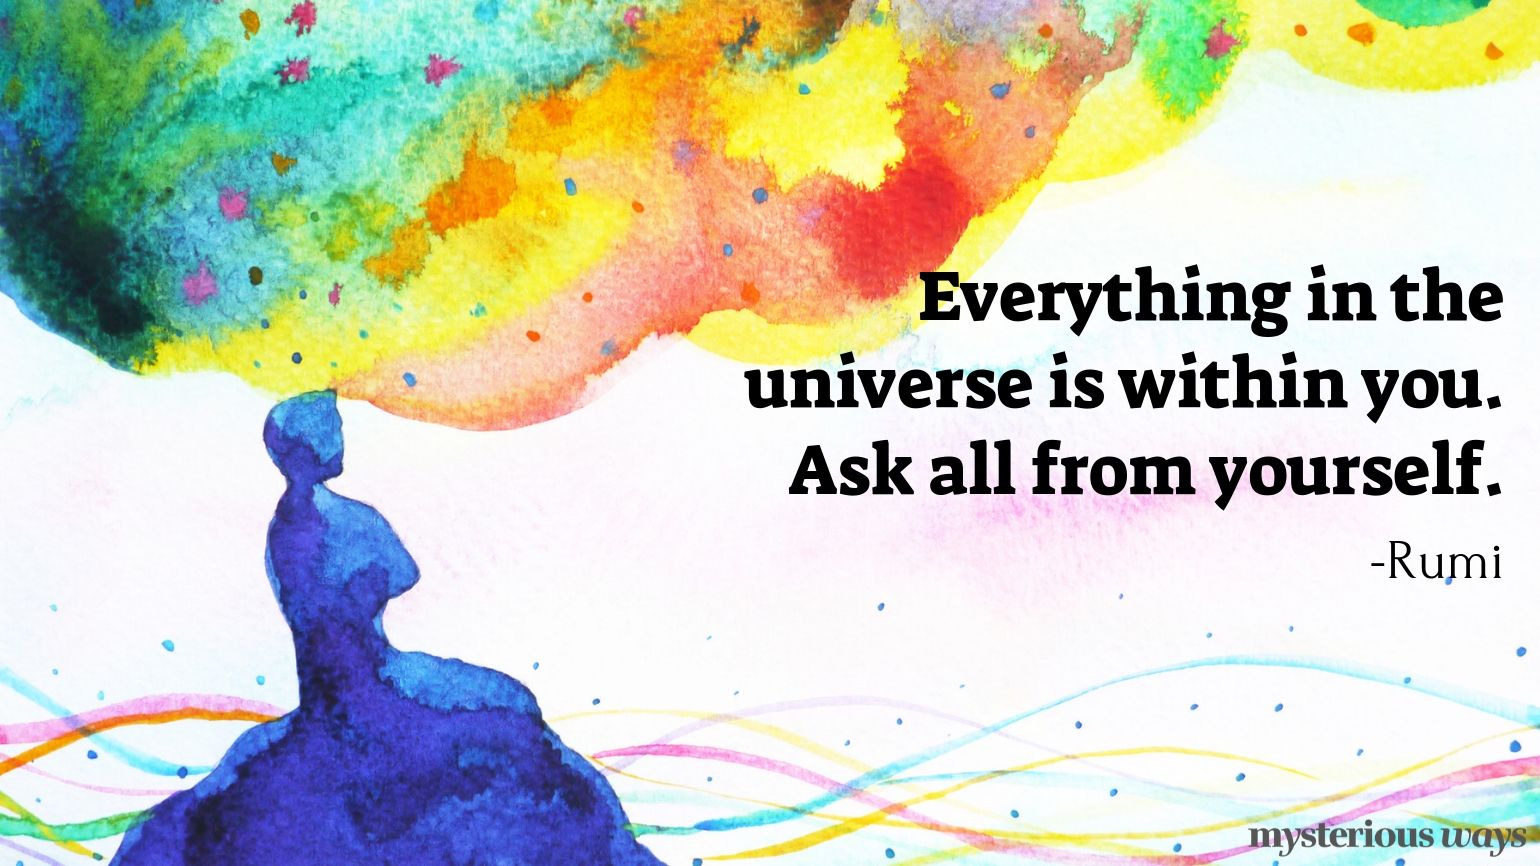 Everything in the universe is within you. Ask all from yourself.” —Rumi